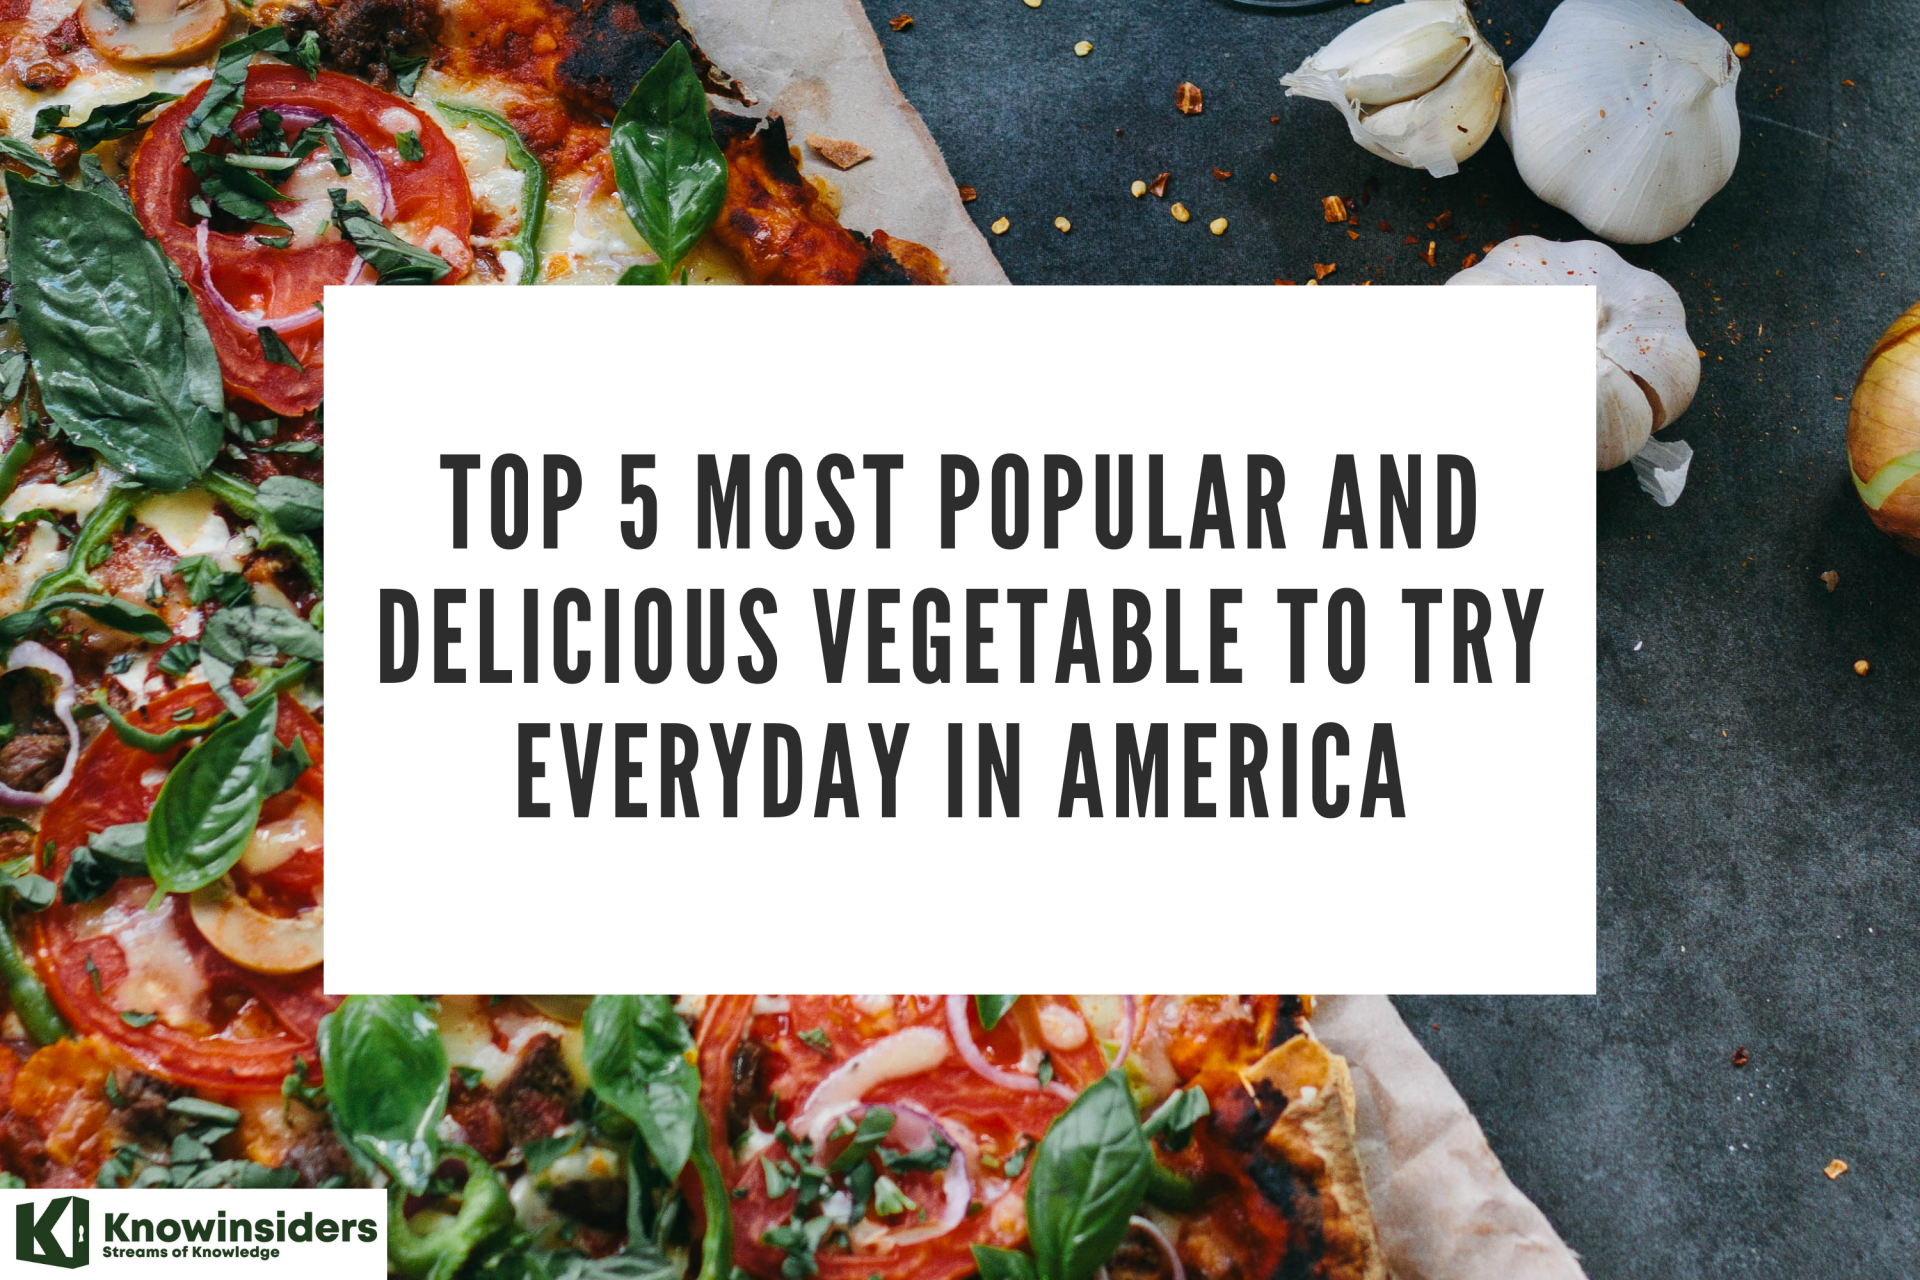 Top 5 Most Popular and Delicious Vegetable to Try Everyday in America